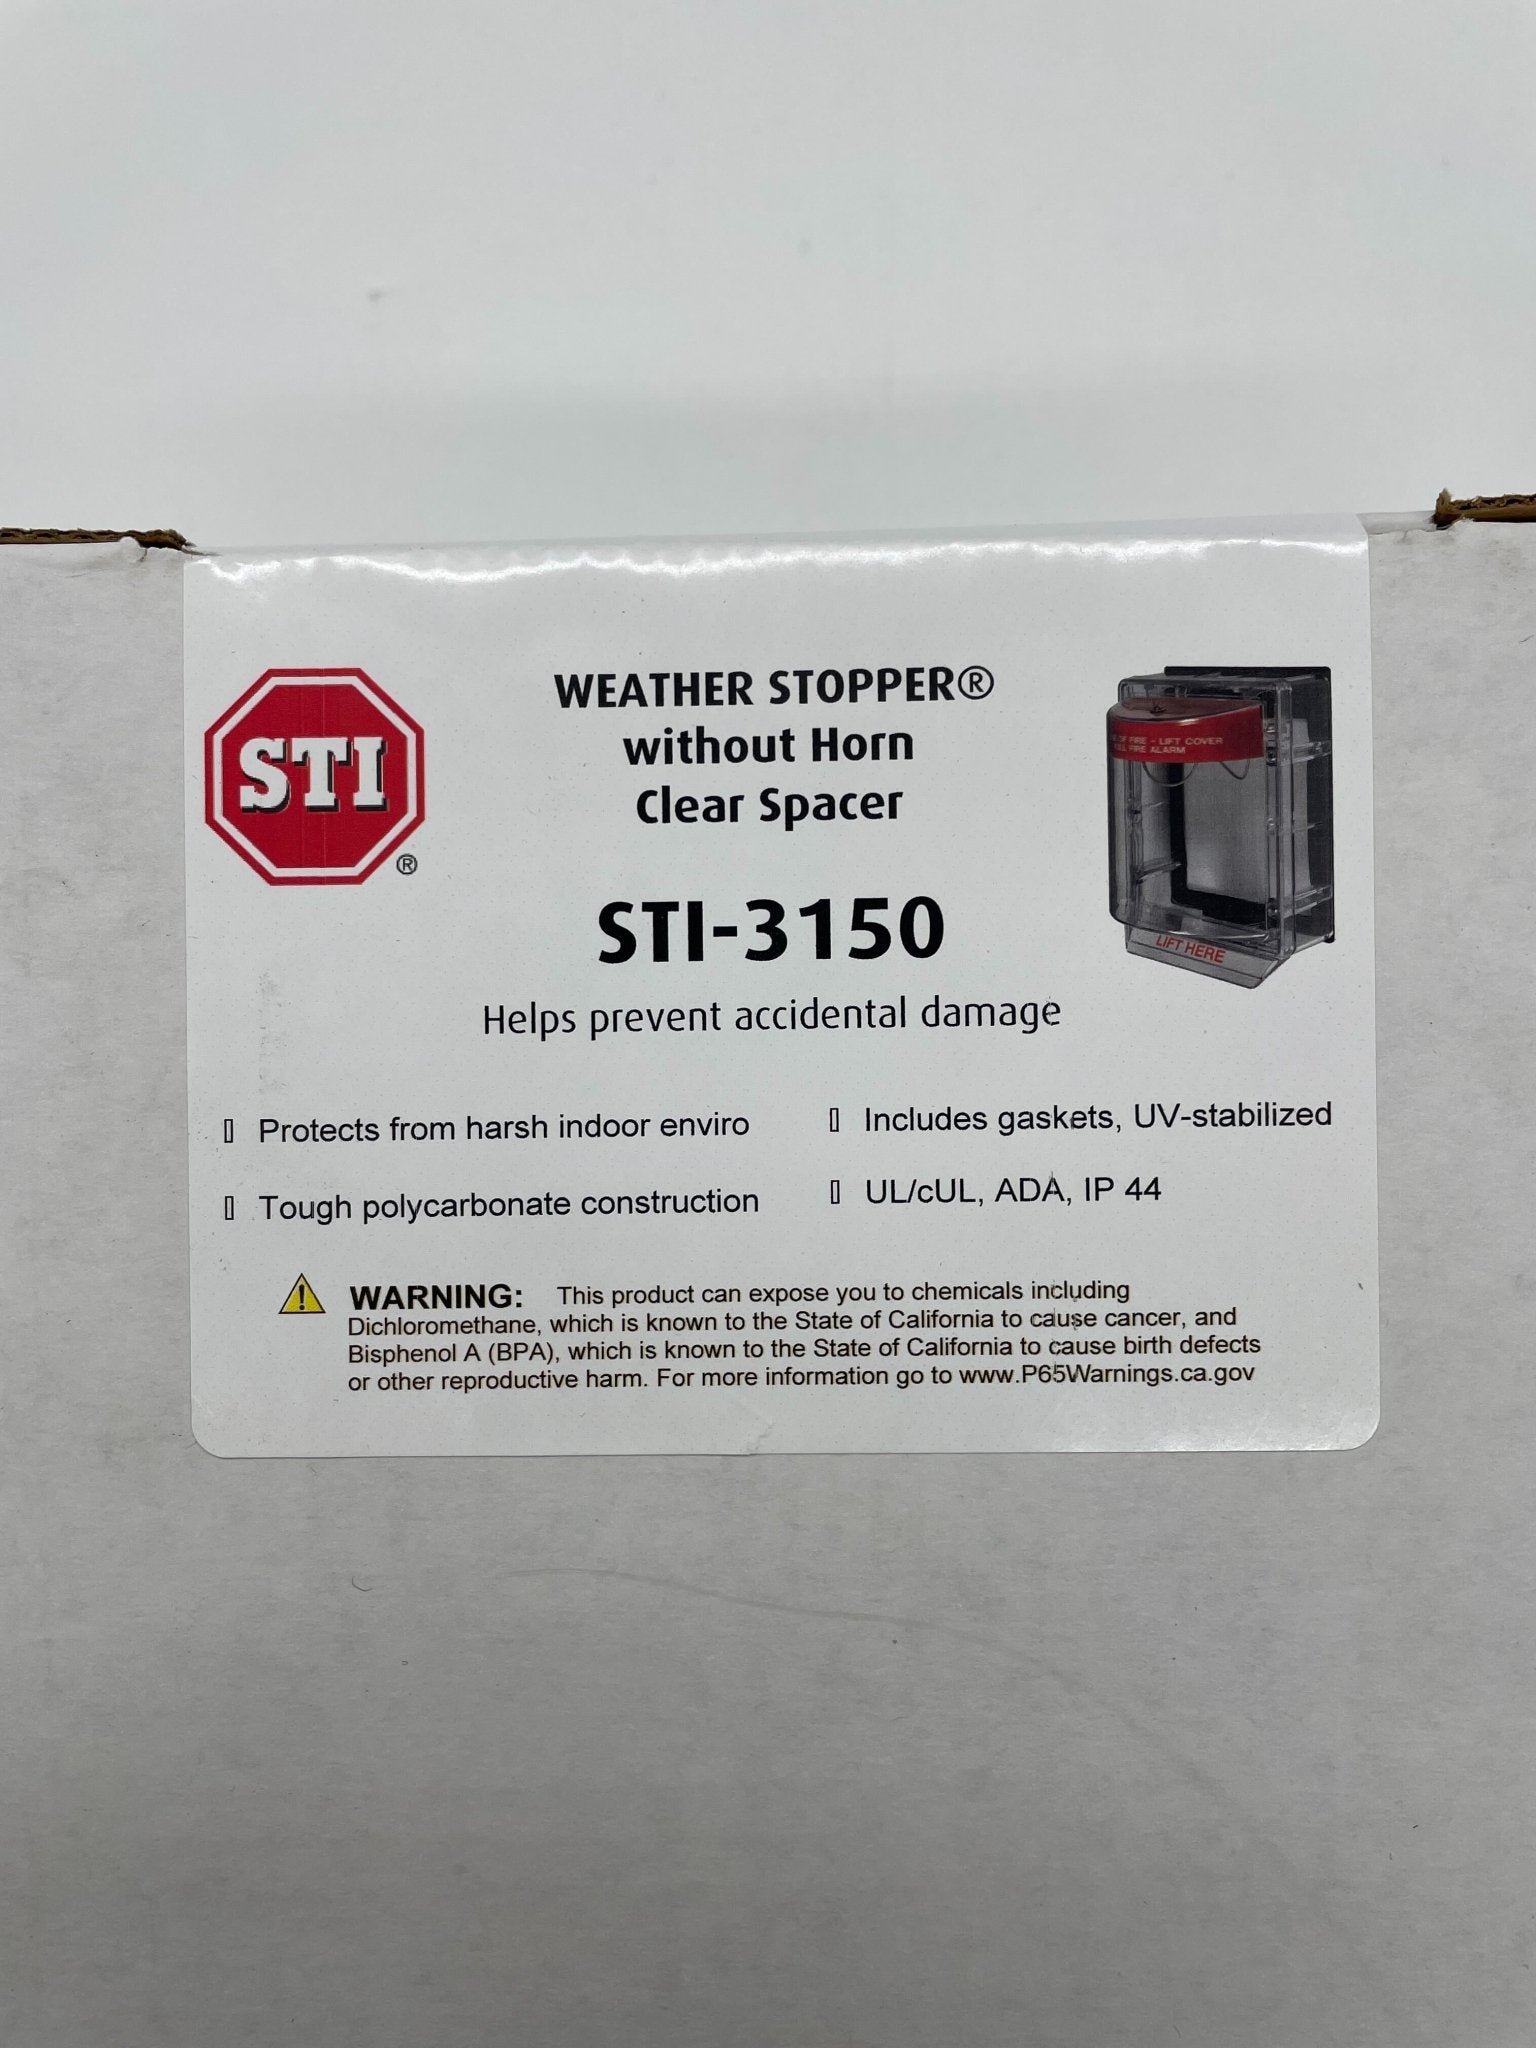 STI-3150 Stopper Without Horn Clear - The Fire Alarm Supplier